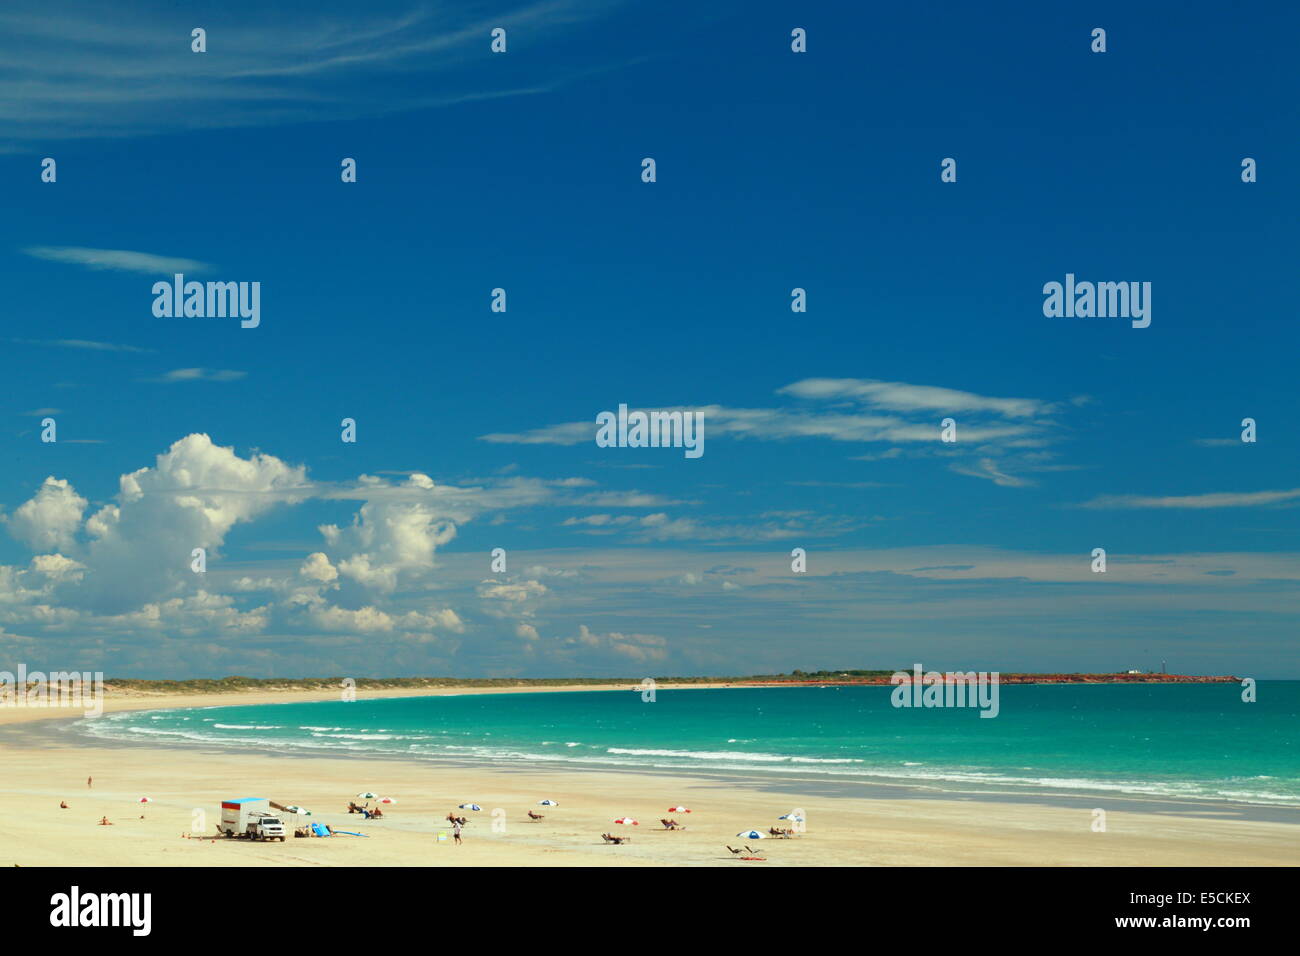 The famous and iconic Cable Beach at Broome, Western Australia. Stock Photo